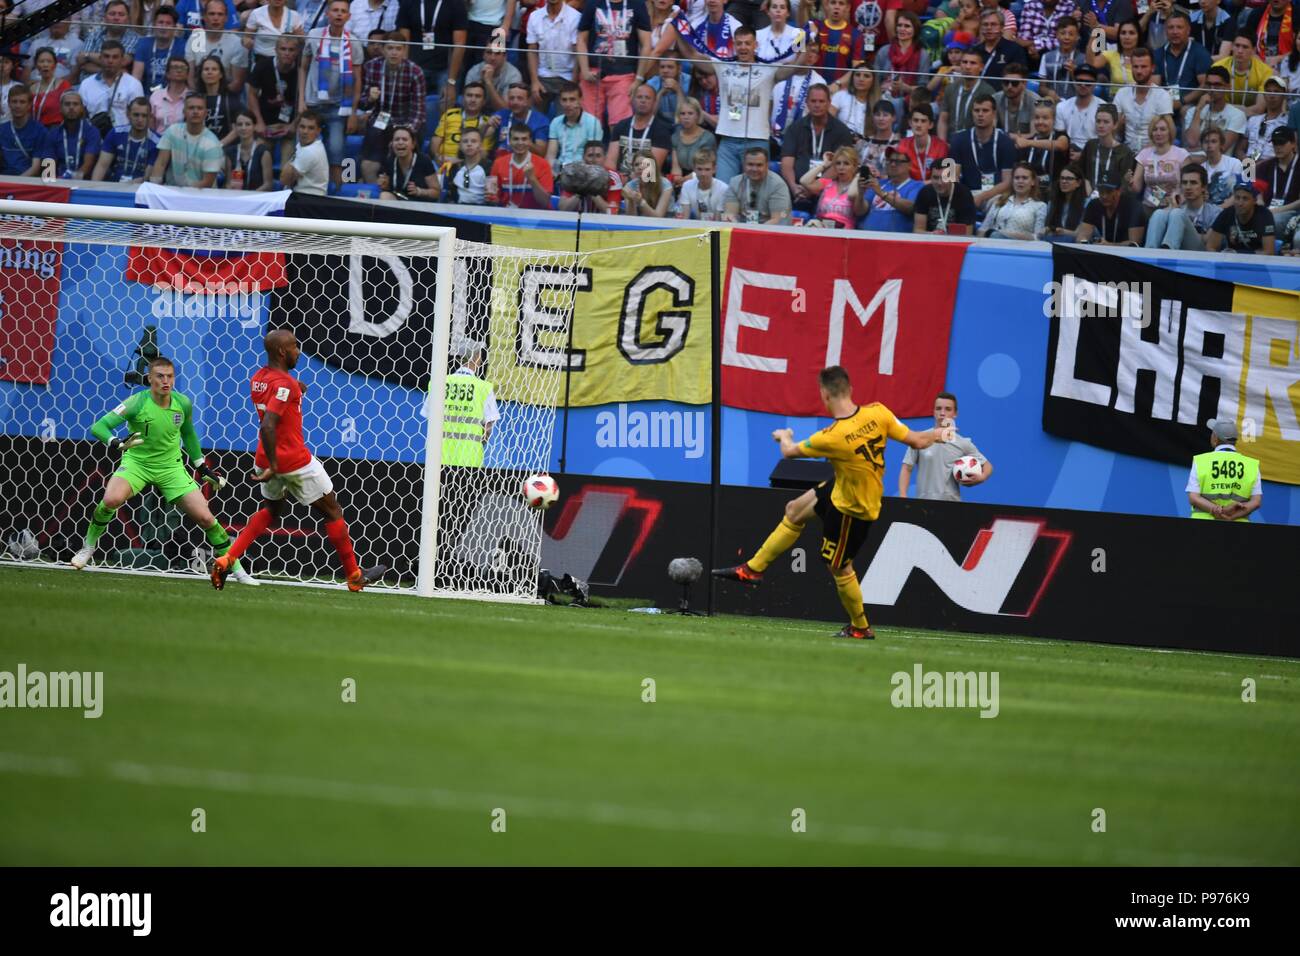 July 14th, 2018, St Petersburg, Russia. Match between England and Belgium 2018 FIFA World Cup Russia 3rd Place Playoff at Saint-Petersburg Stadium, Russia. Shoja Lak/Alamy Live News Stock Photo